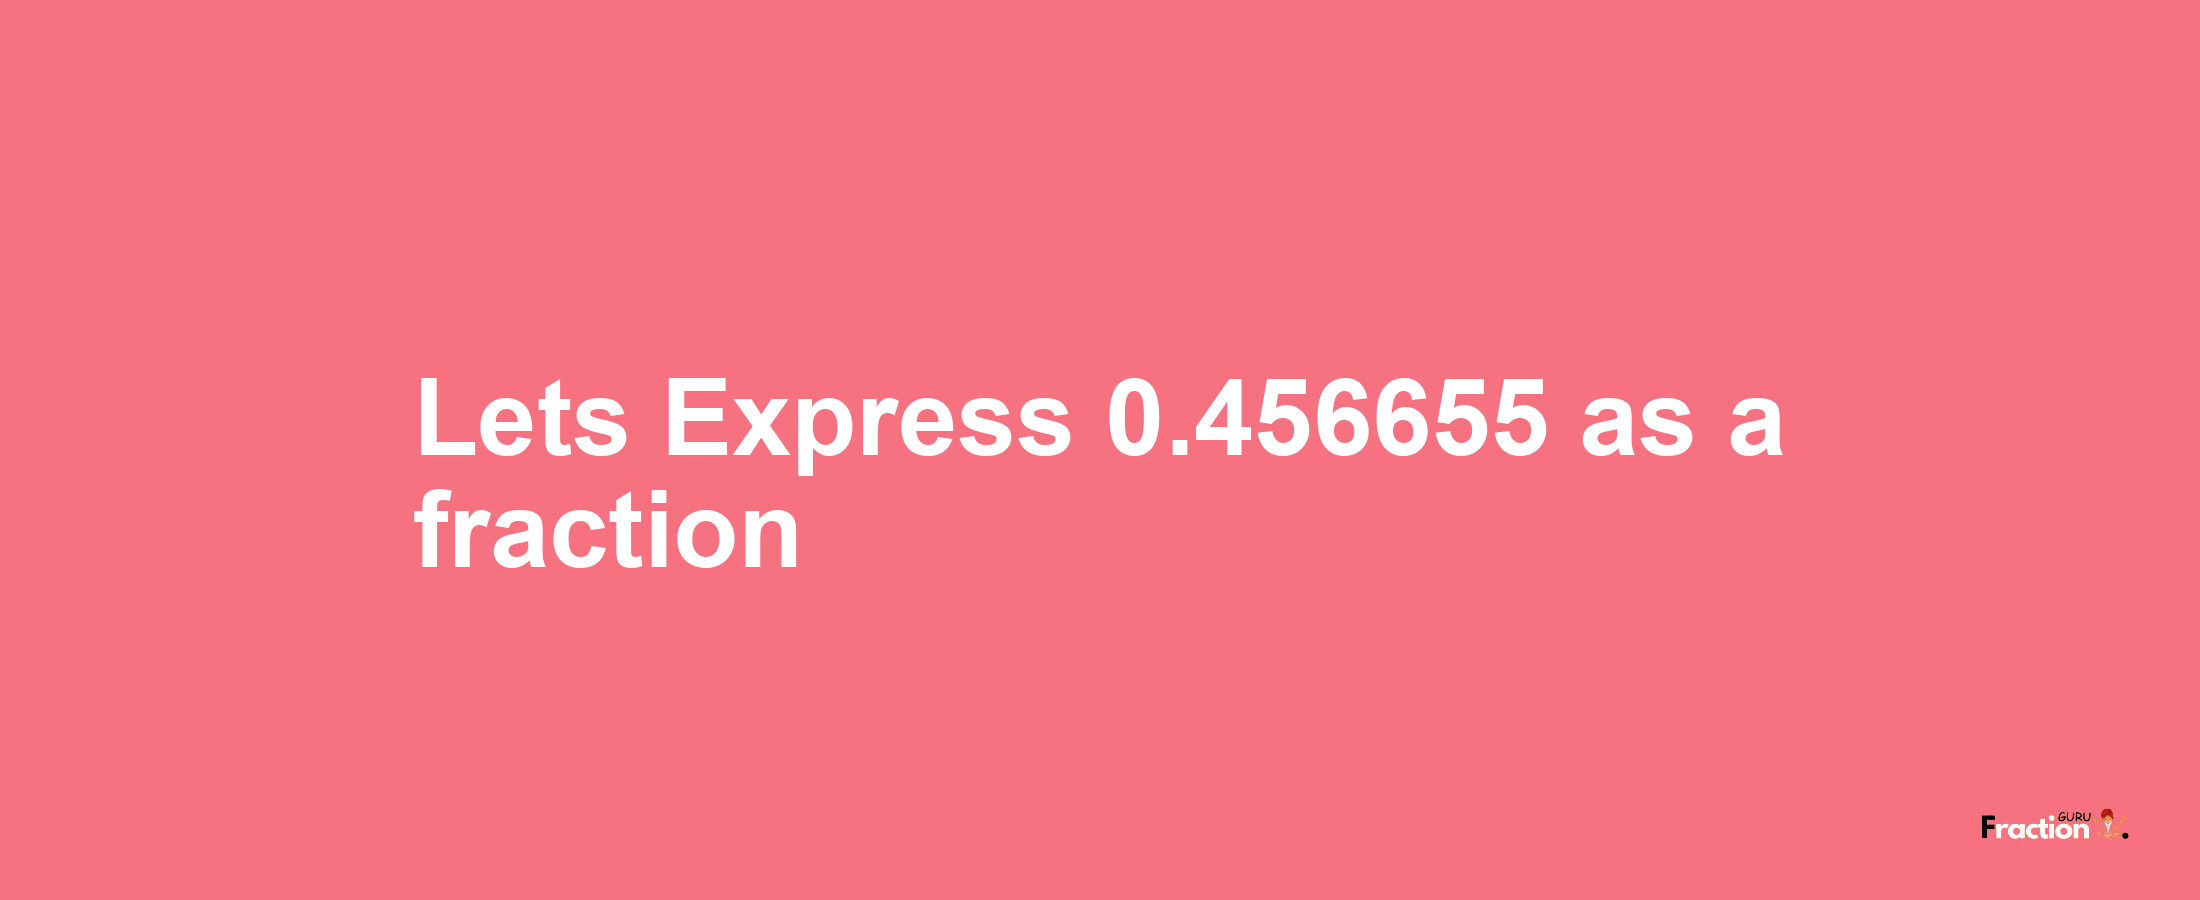 Lets Express 0.456655 as afraction